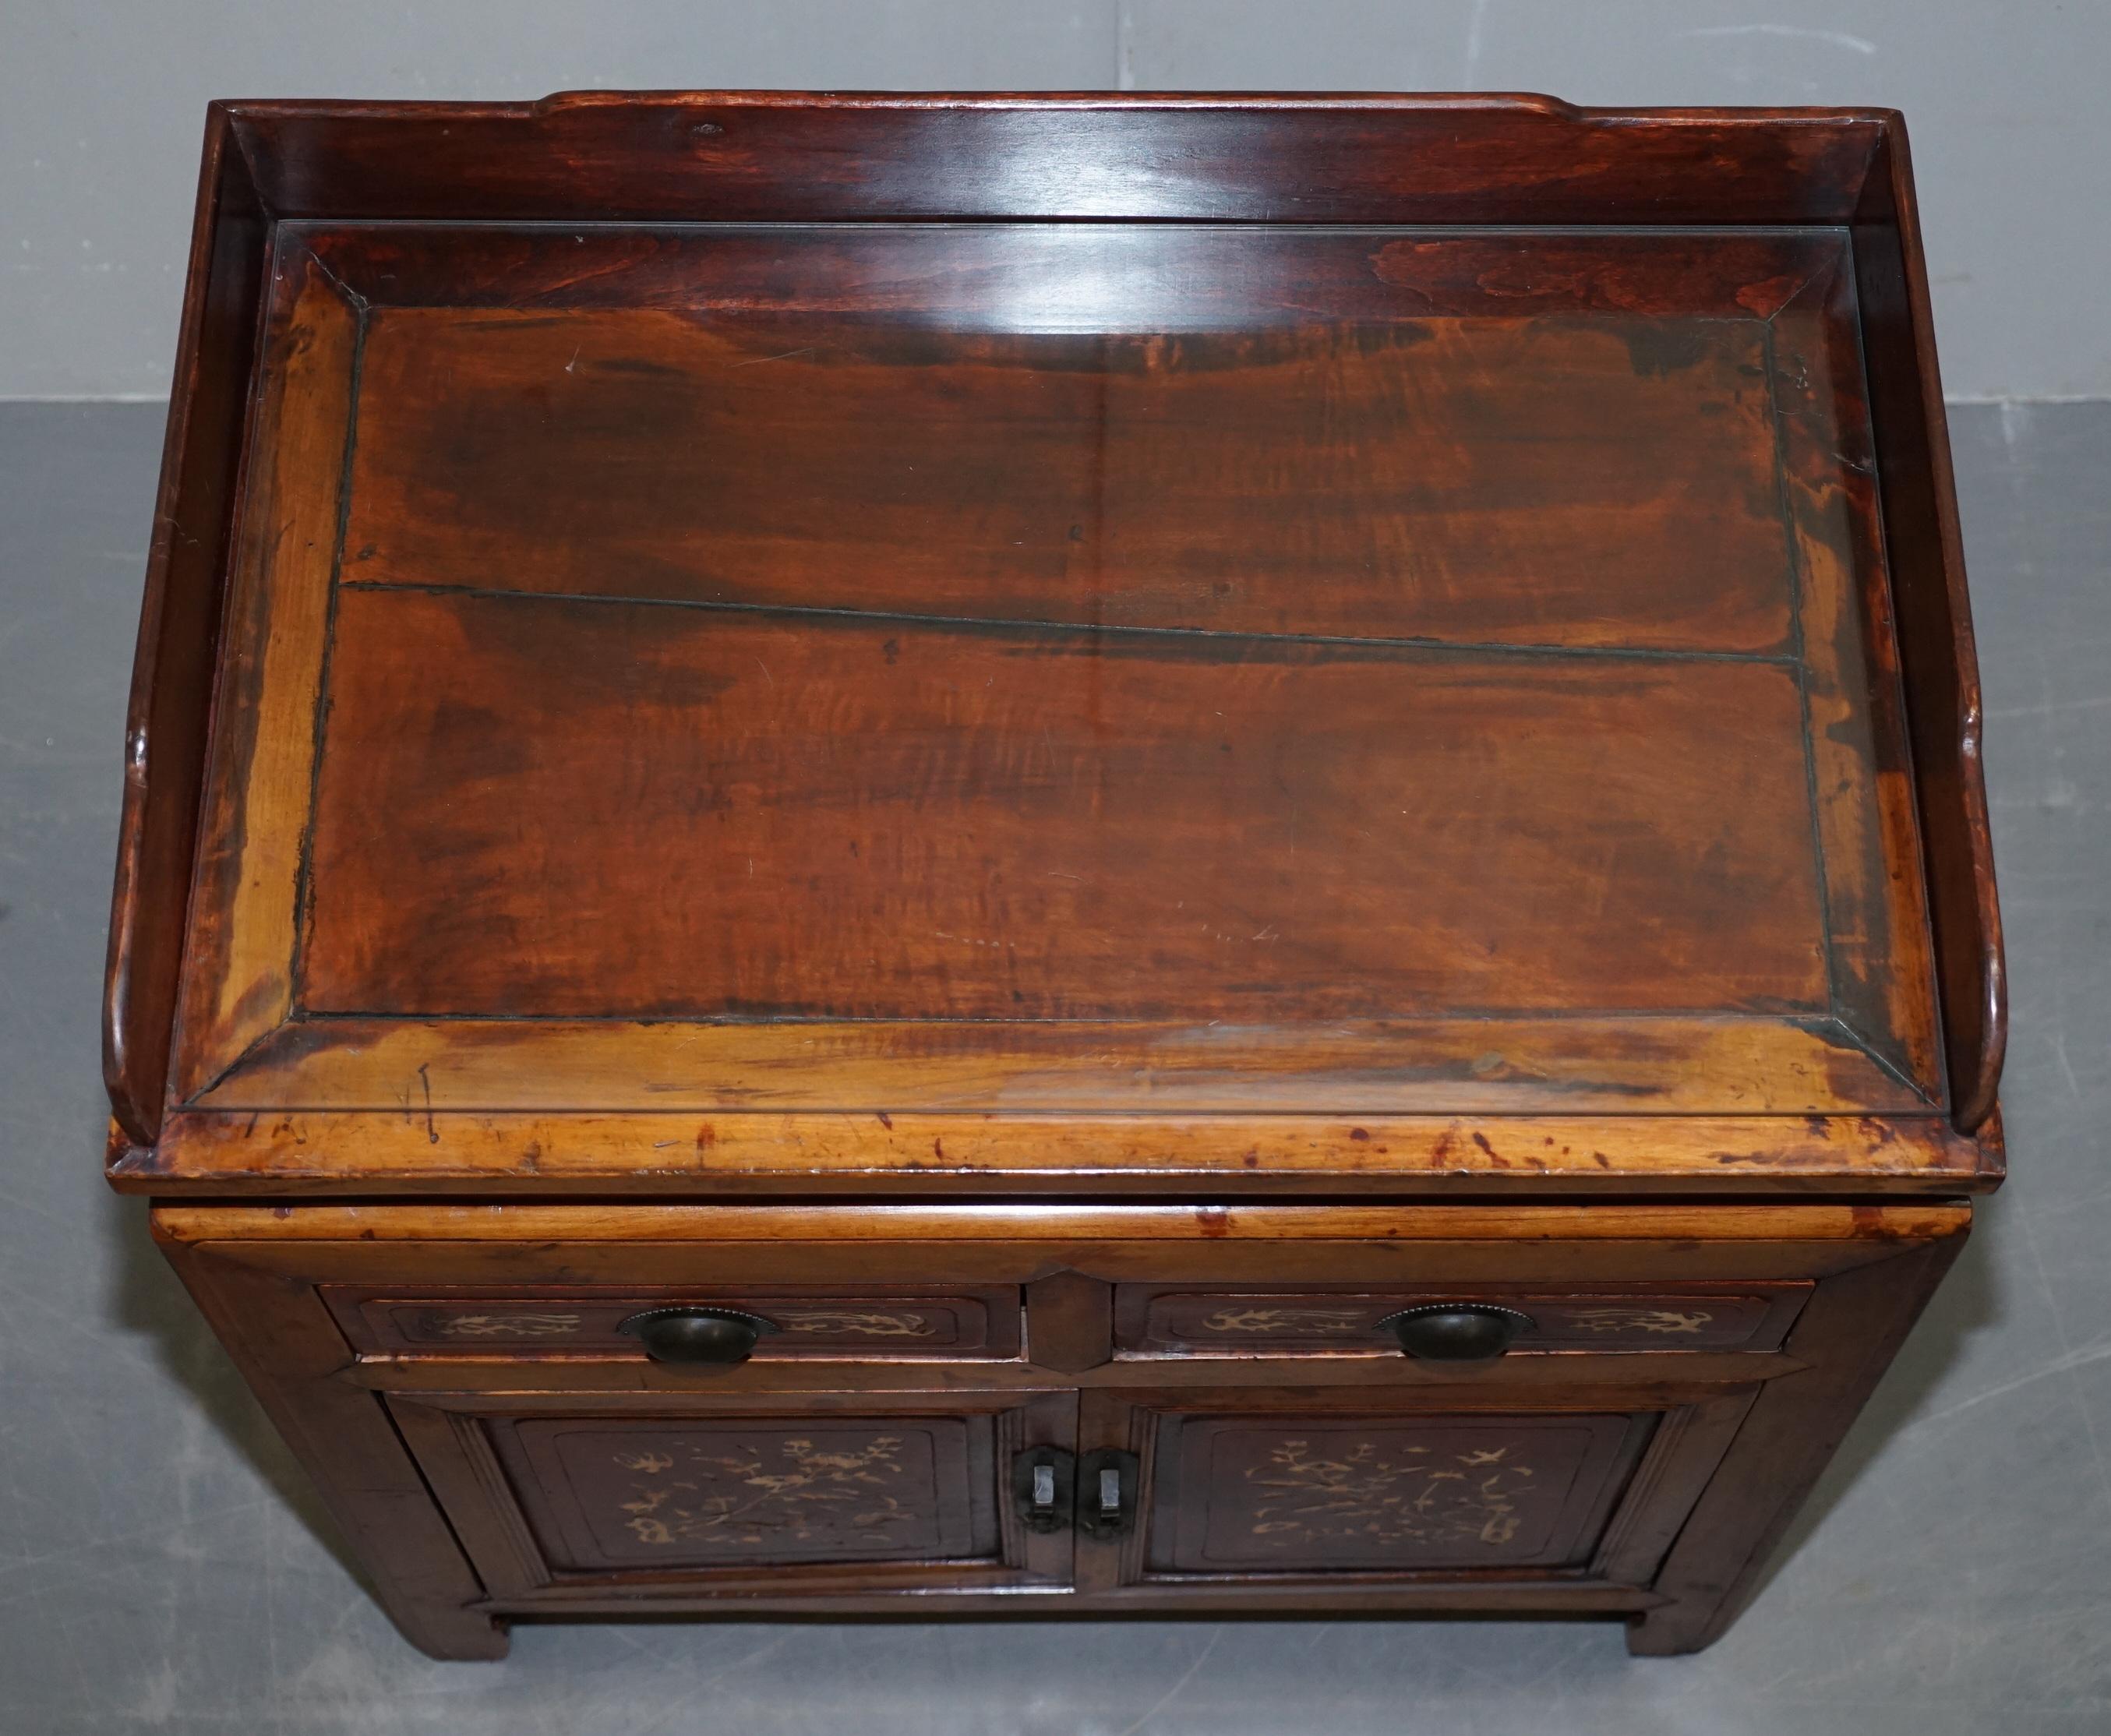 Teak Antique Chinese Export circa 1900 Redwood Lacquered Inlaid Wash Stand Sideboard For Sale